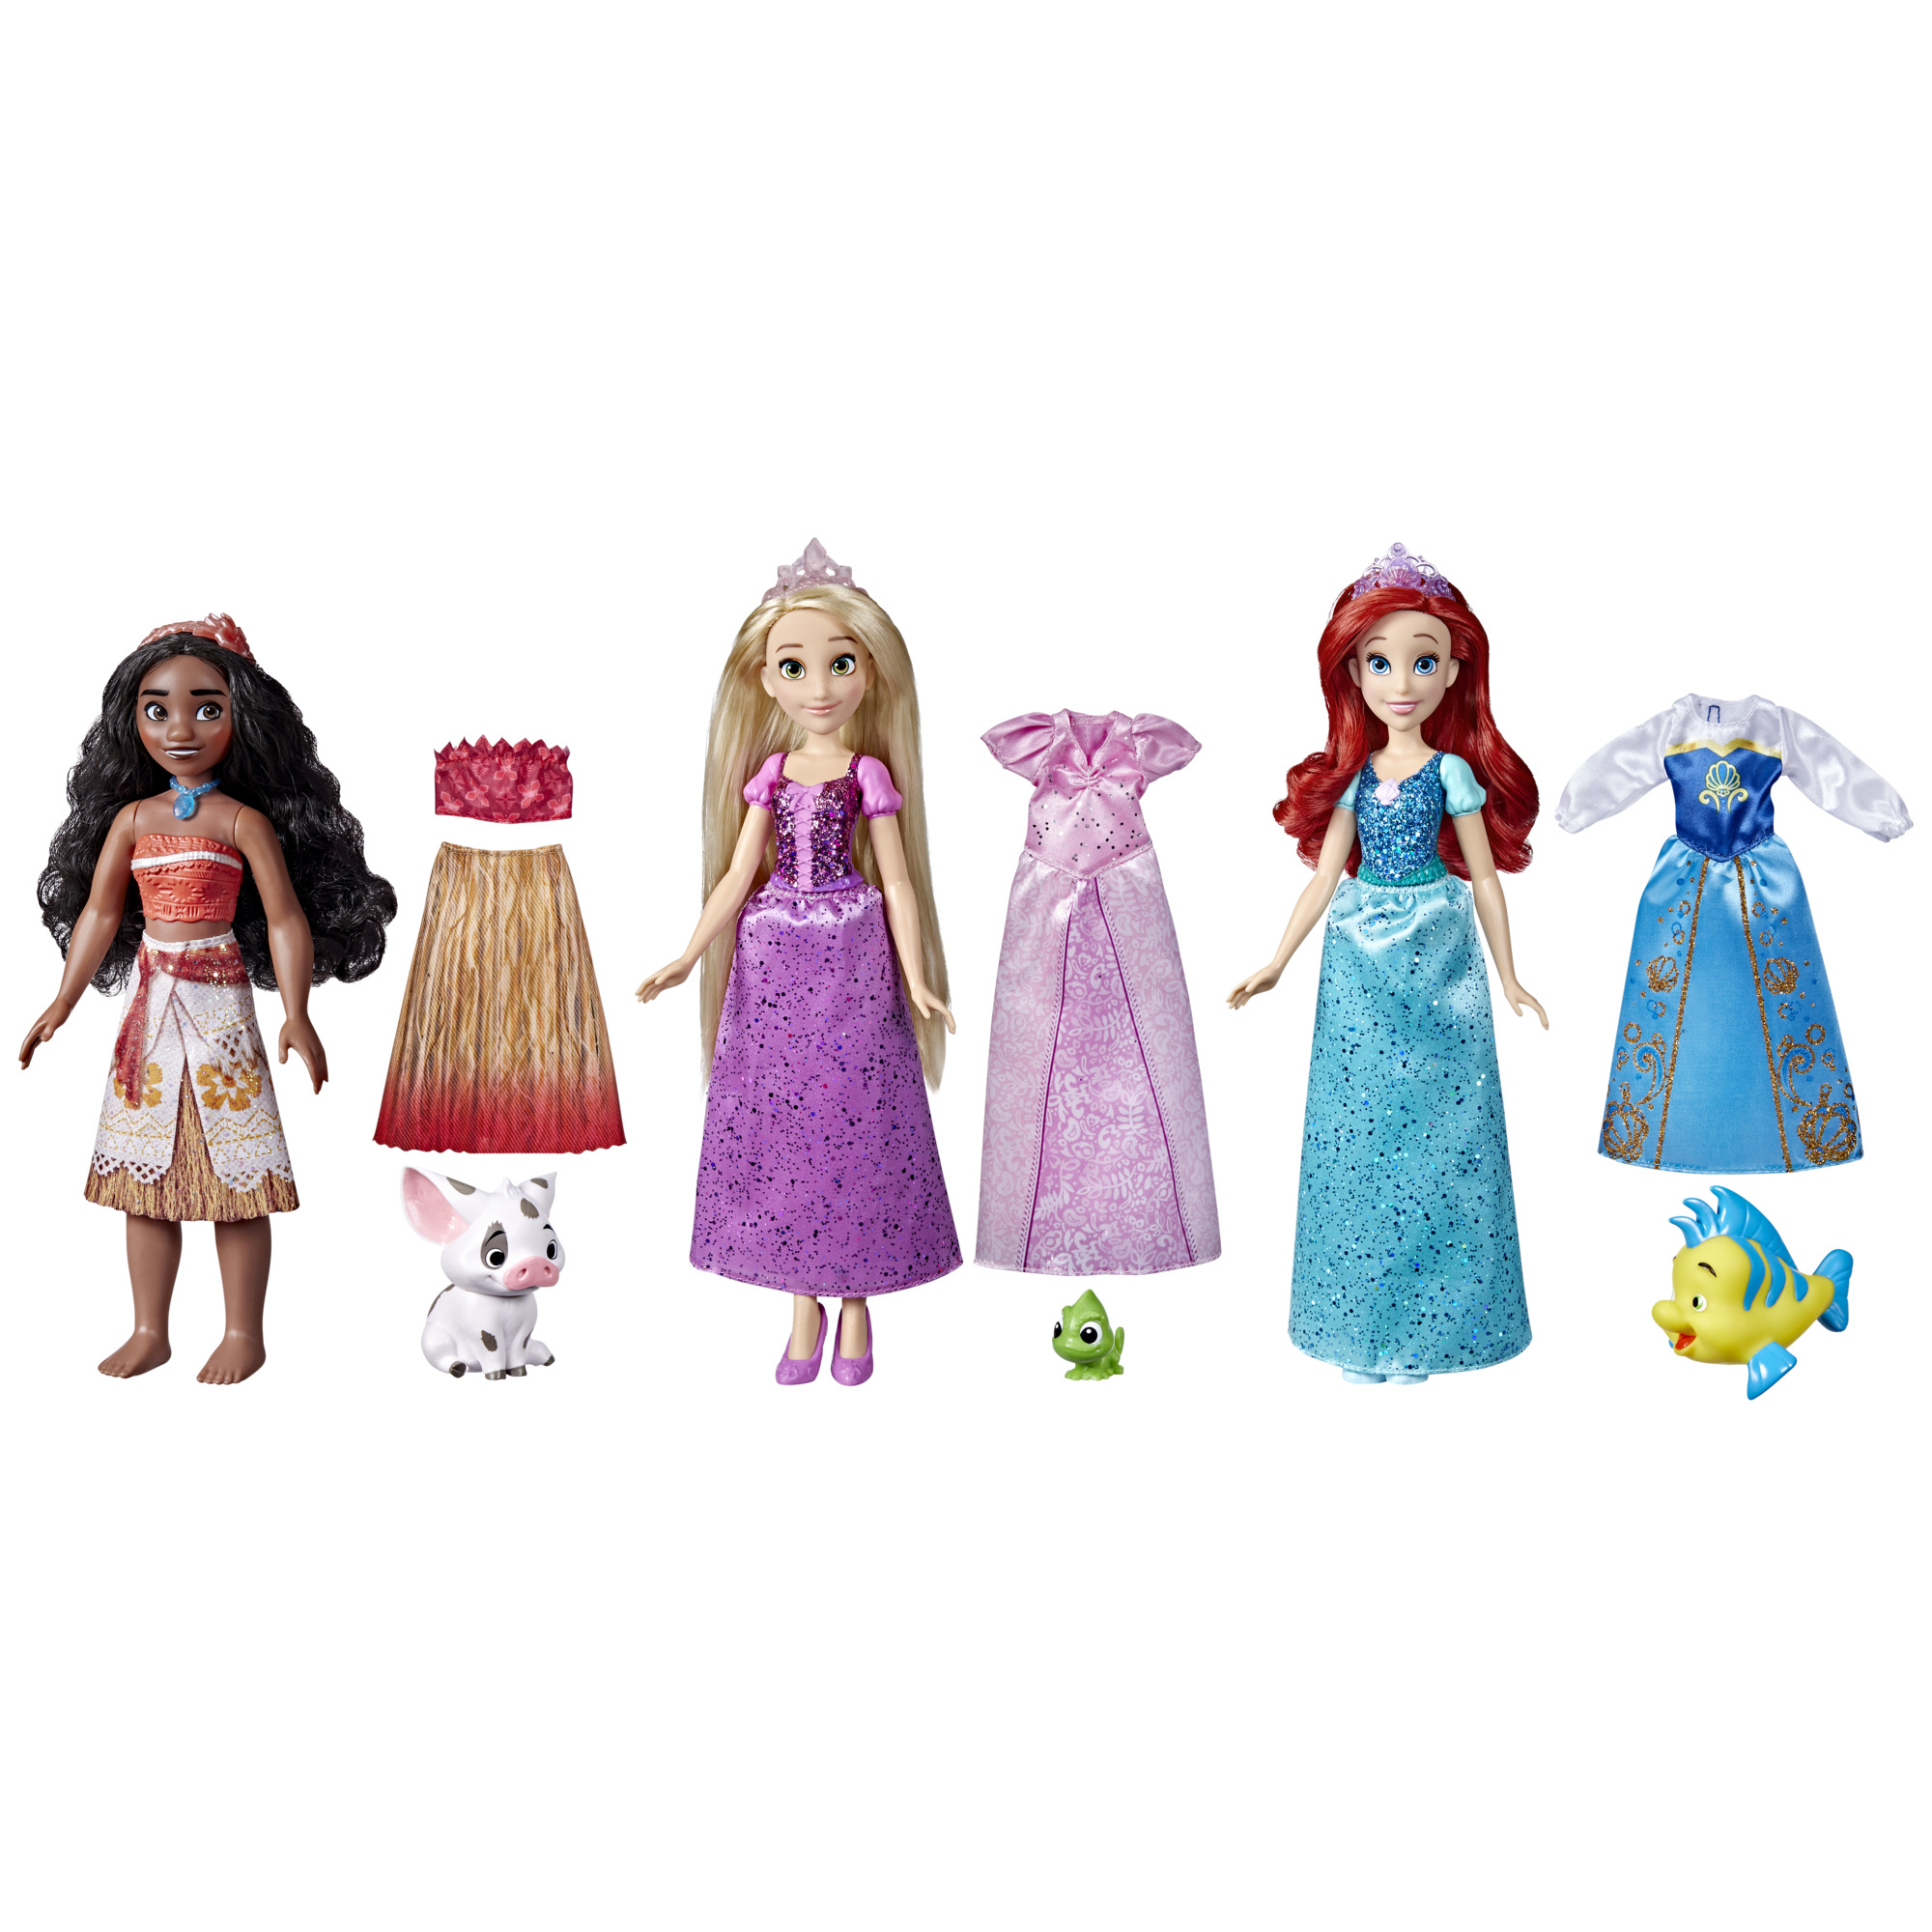 Disney Princess Royal Fashions and Friends 12 inch Fashion Doll, Ariel, Moana, and Rapunzel, Ages 4+ - image 1 of 5